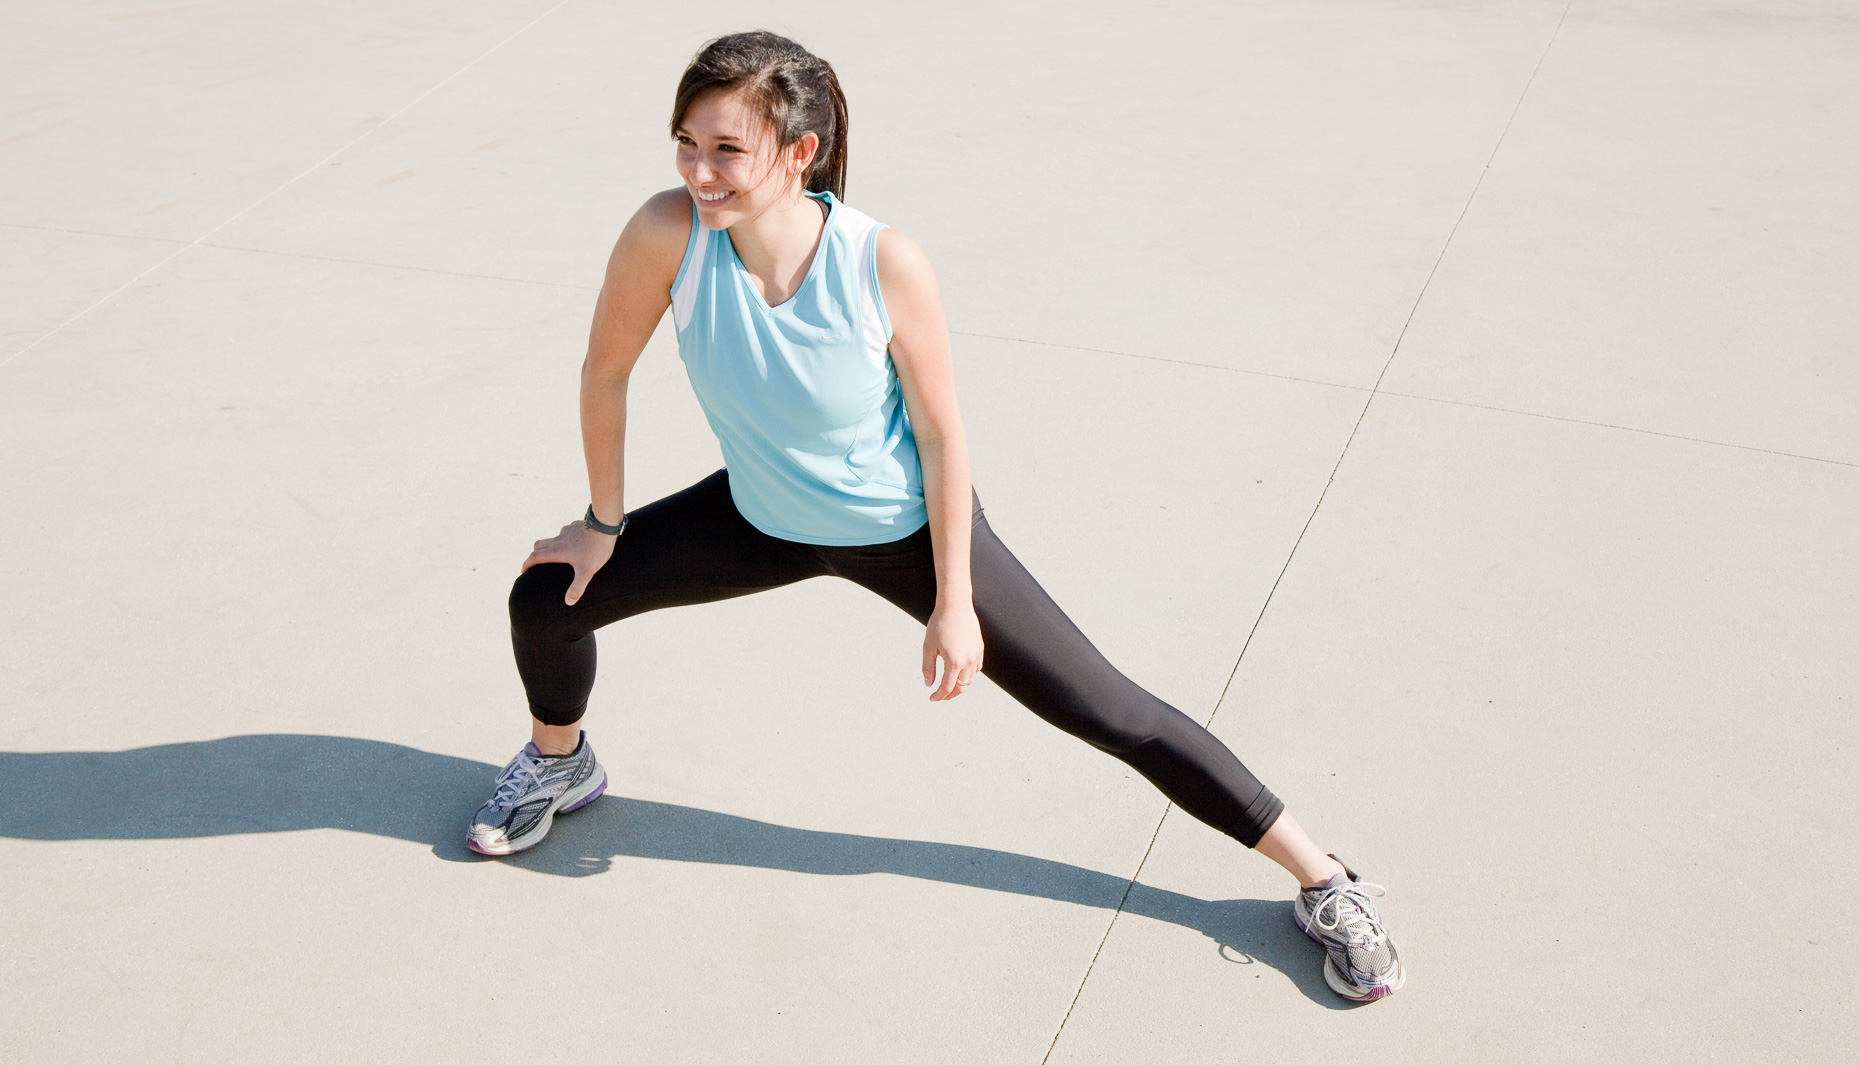 Smiling woman stretching for workout in running clothes against concrete sidewalk background by David Zaitz Photography.